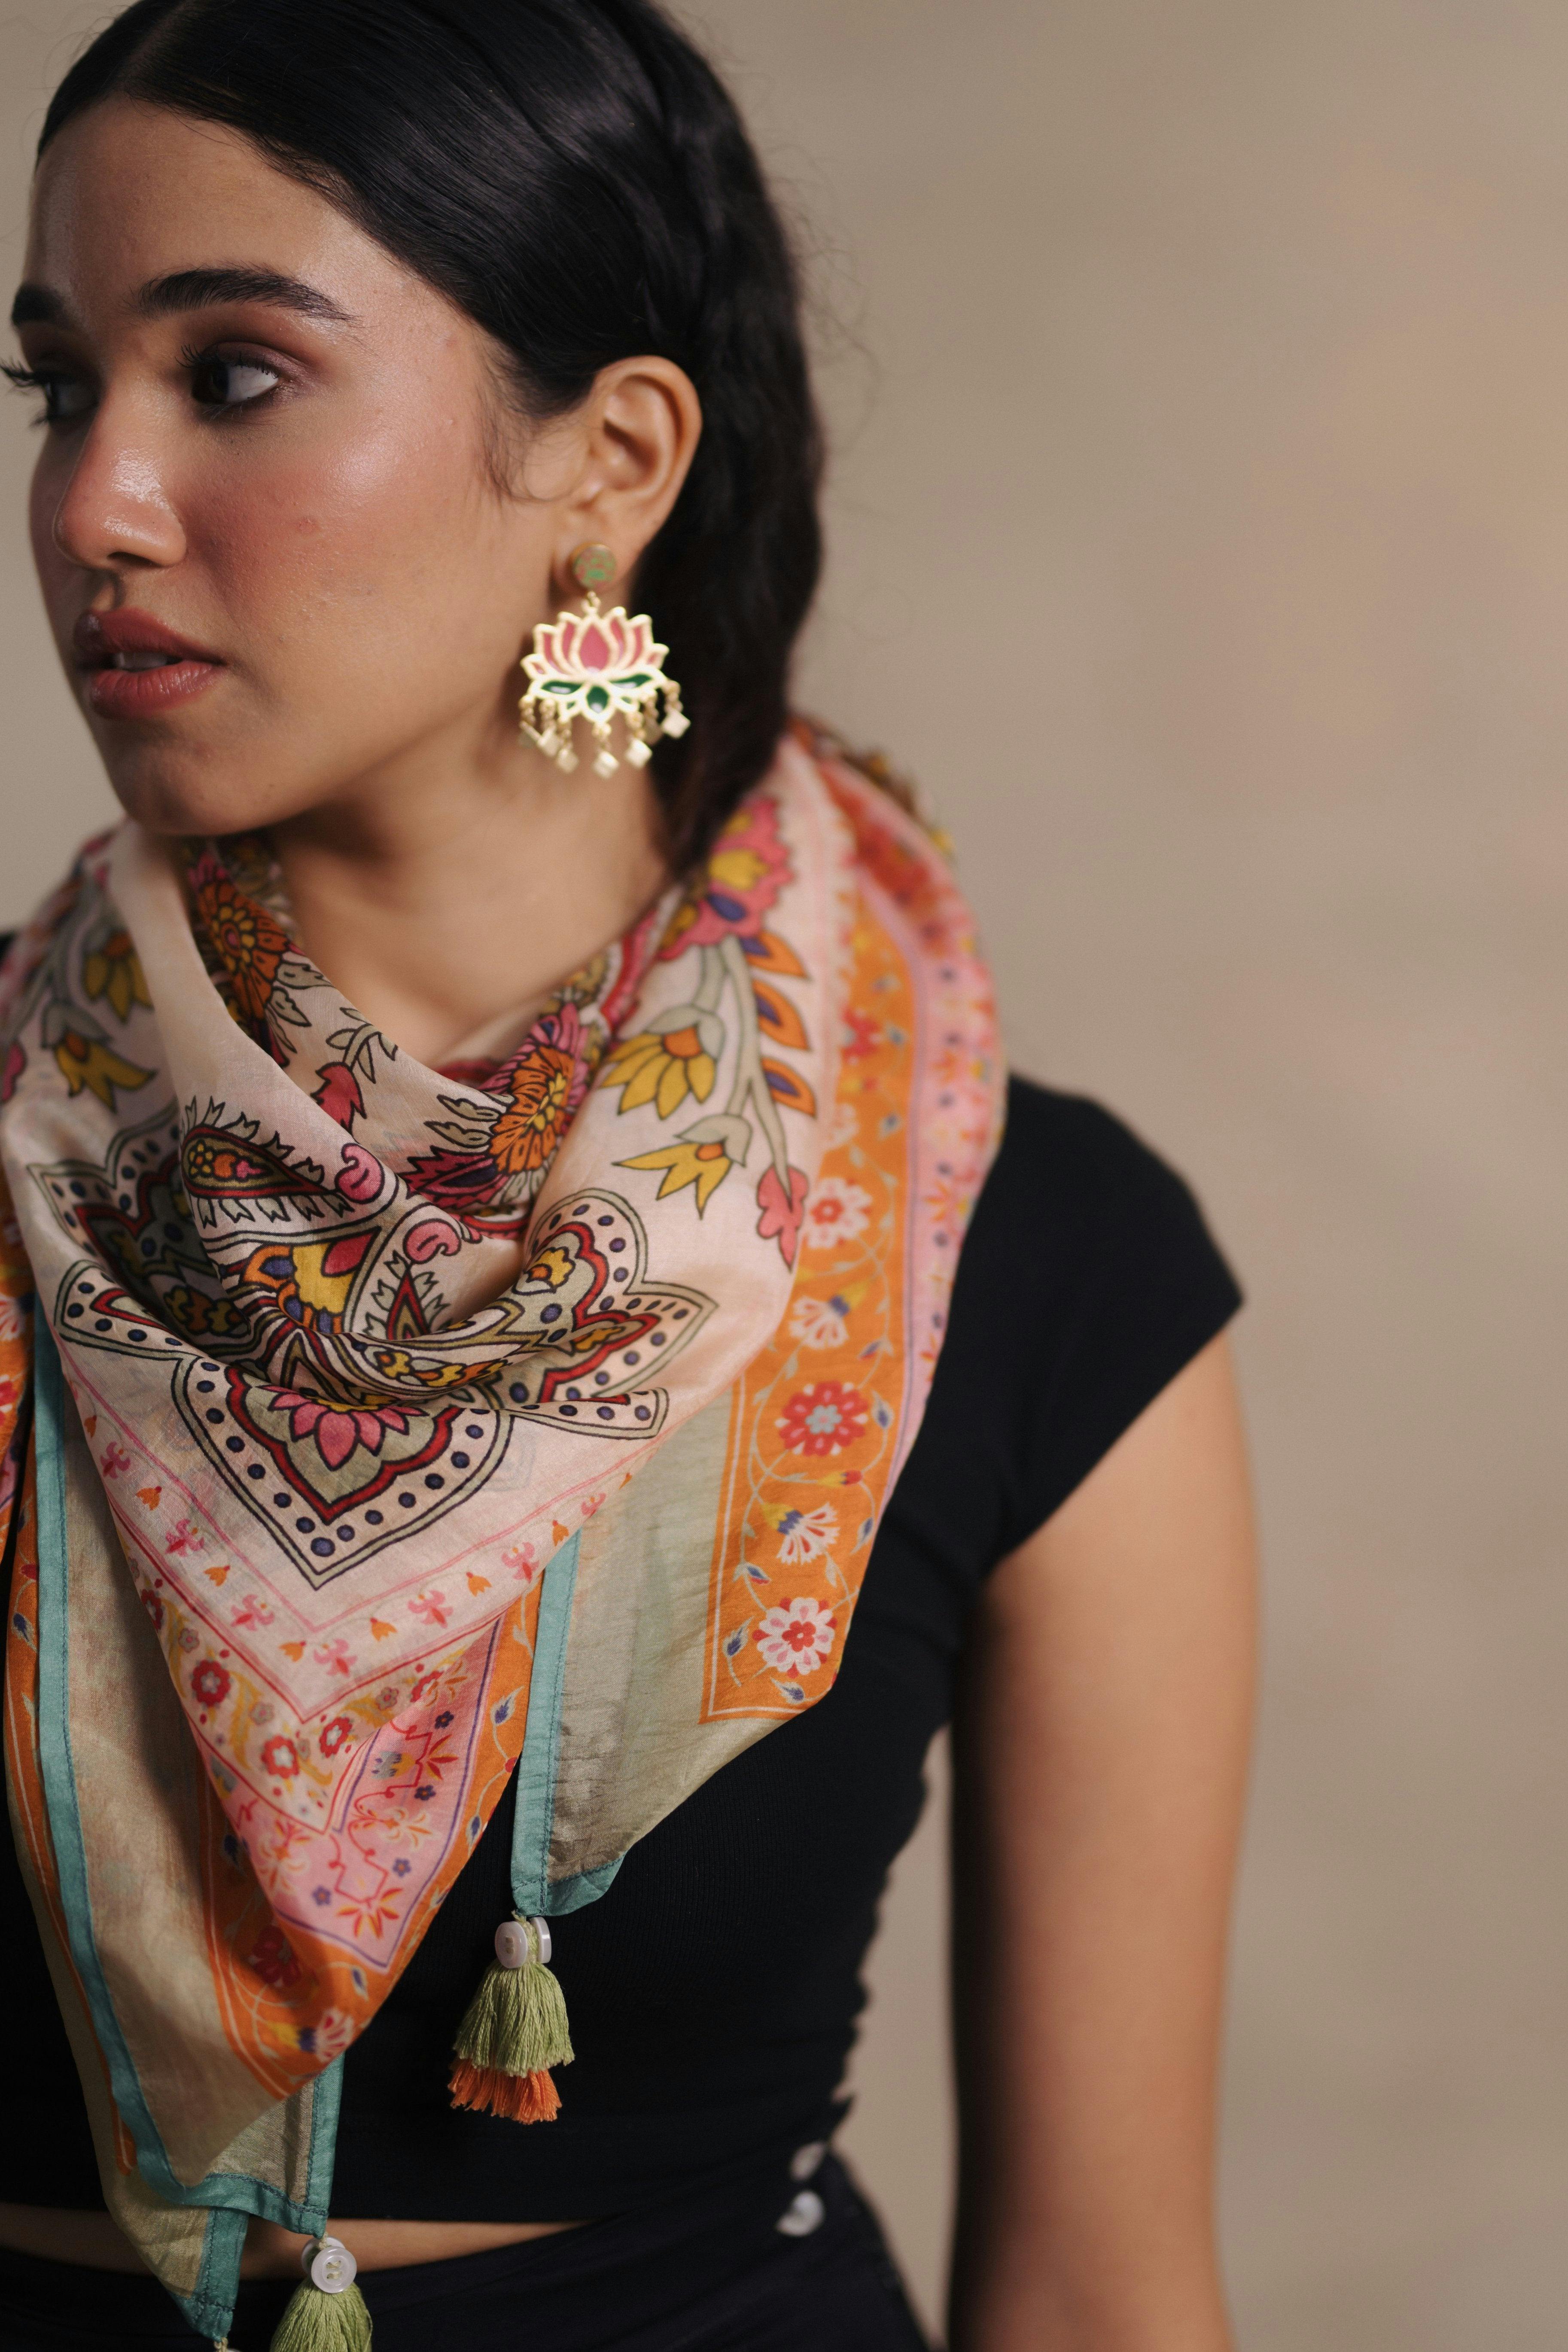 Sindh Scarf, a product by Moh India